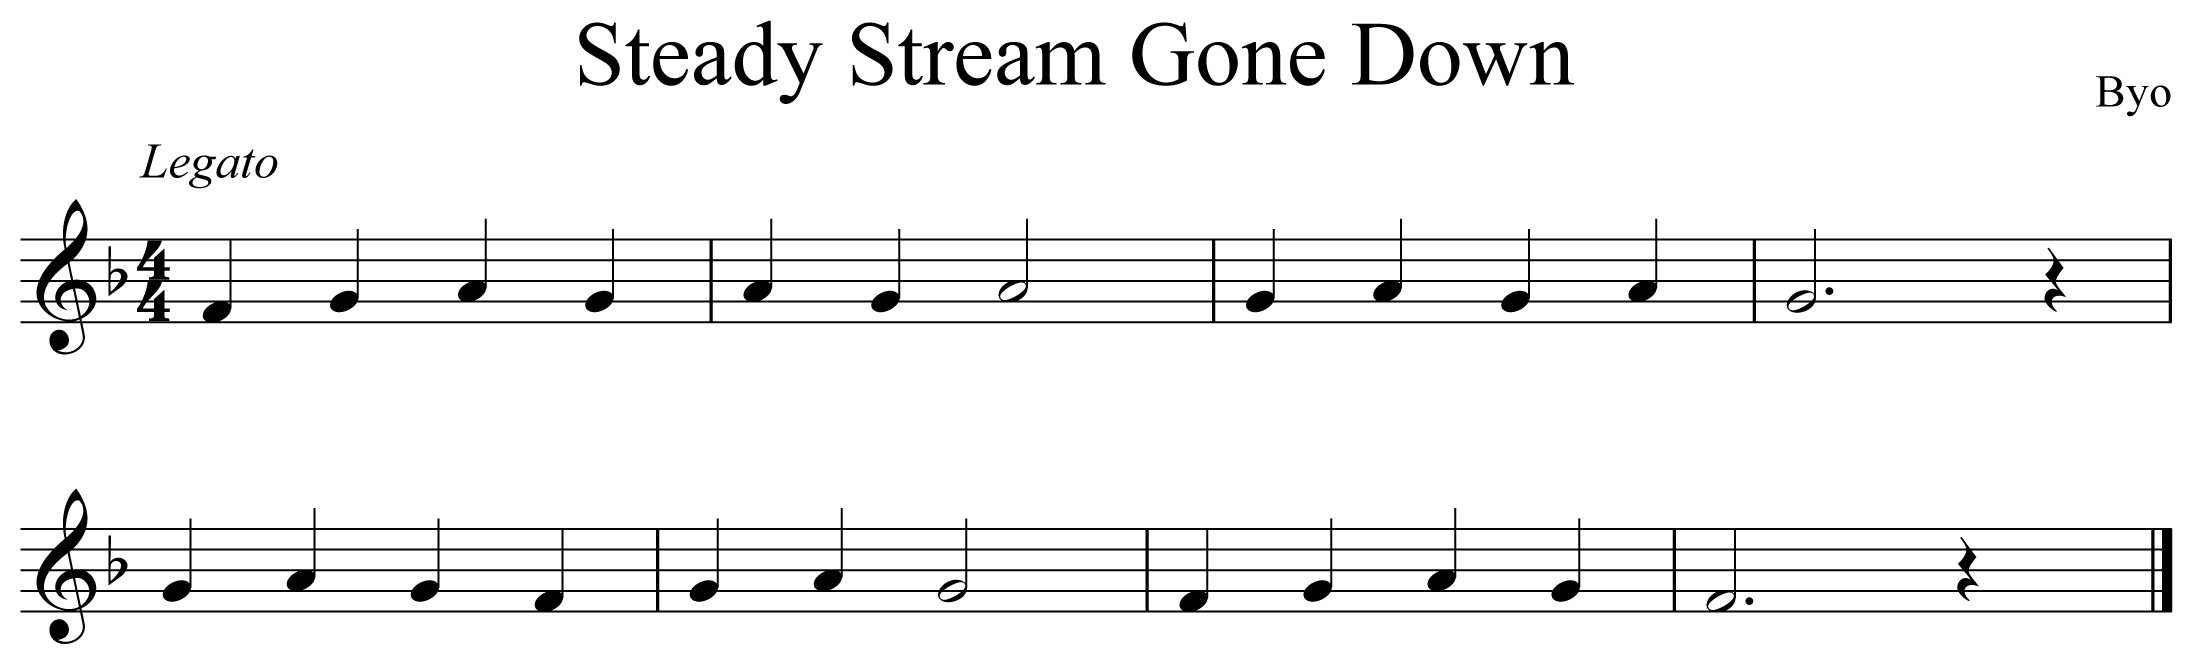 Steady Stream Gone Down Music Notation Trumpet